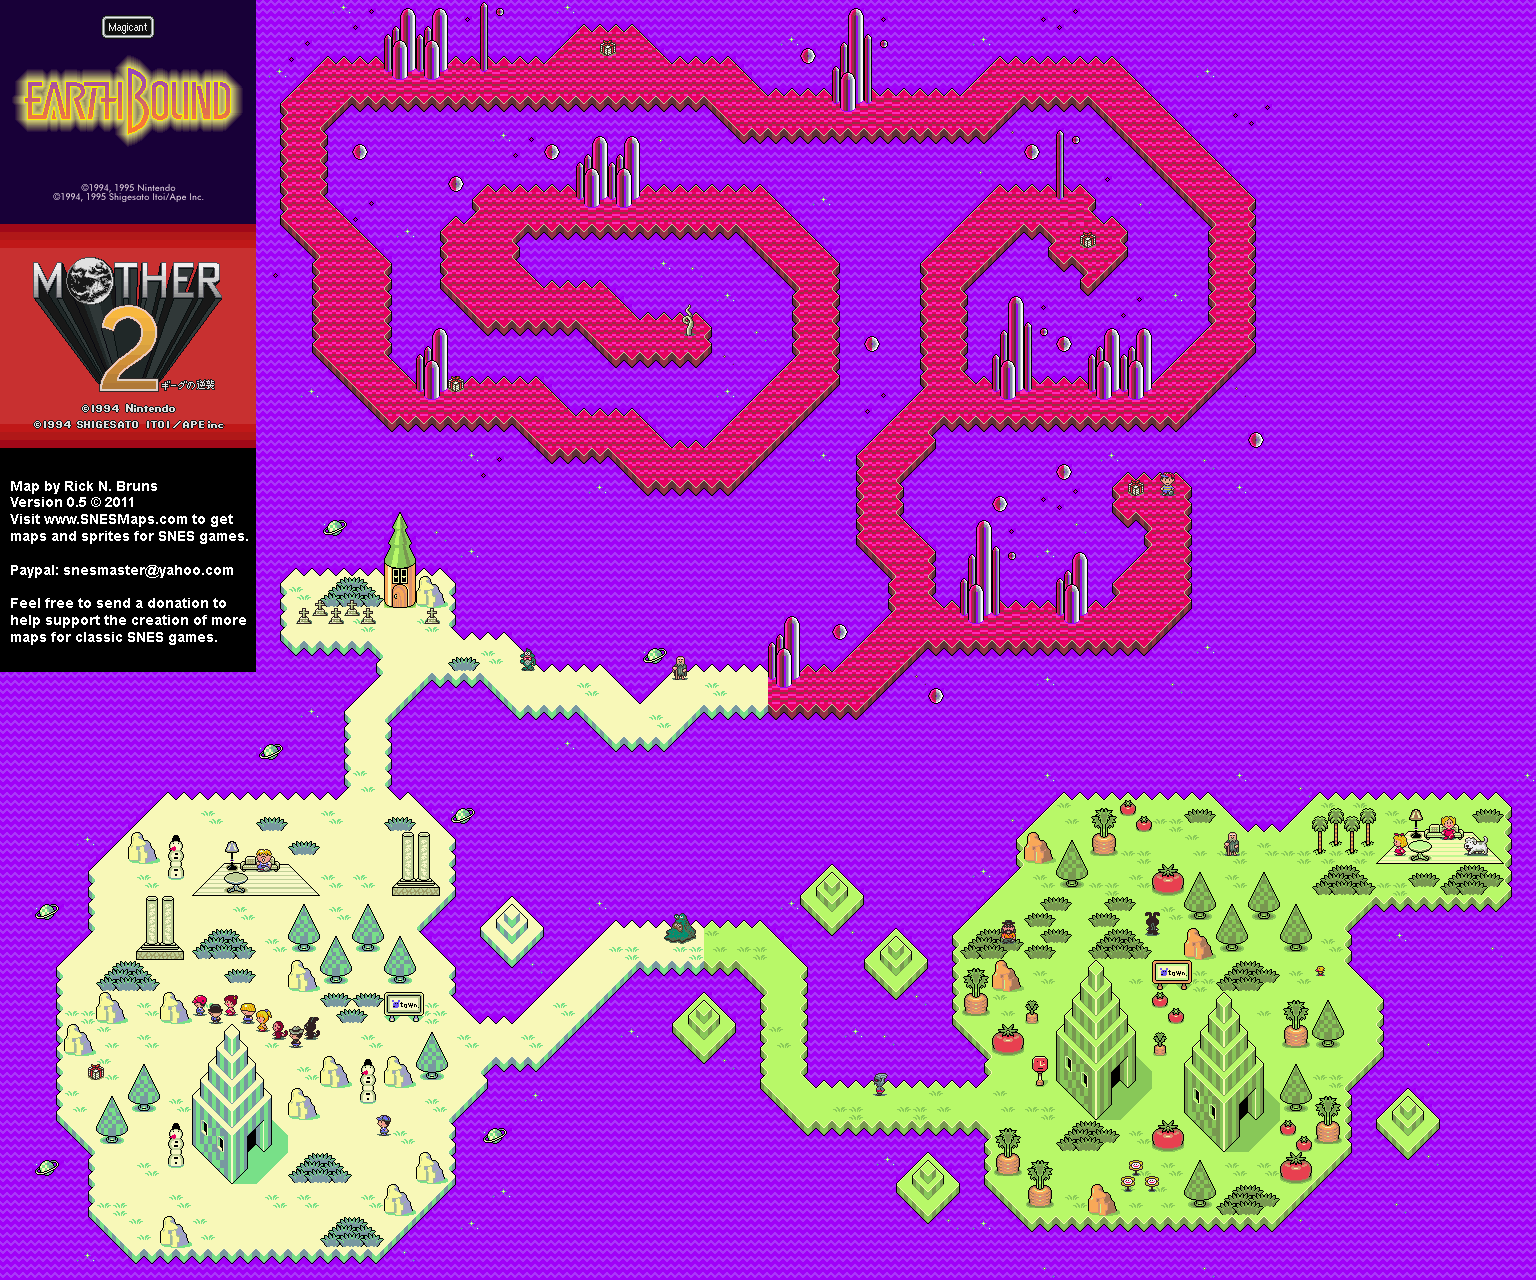 EarthBound (Mother 2) - Magicant Super Nintendo SNES Map